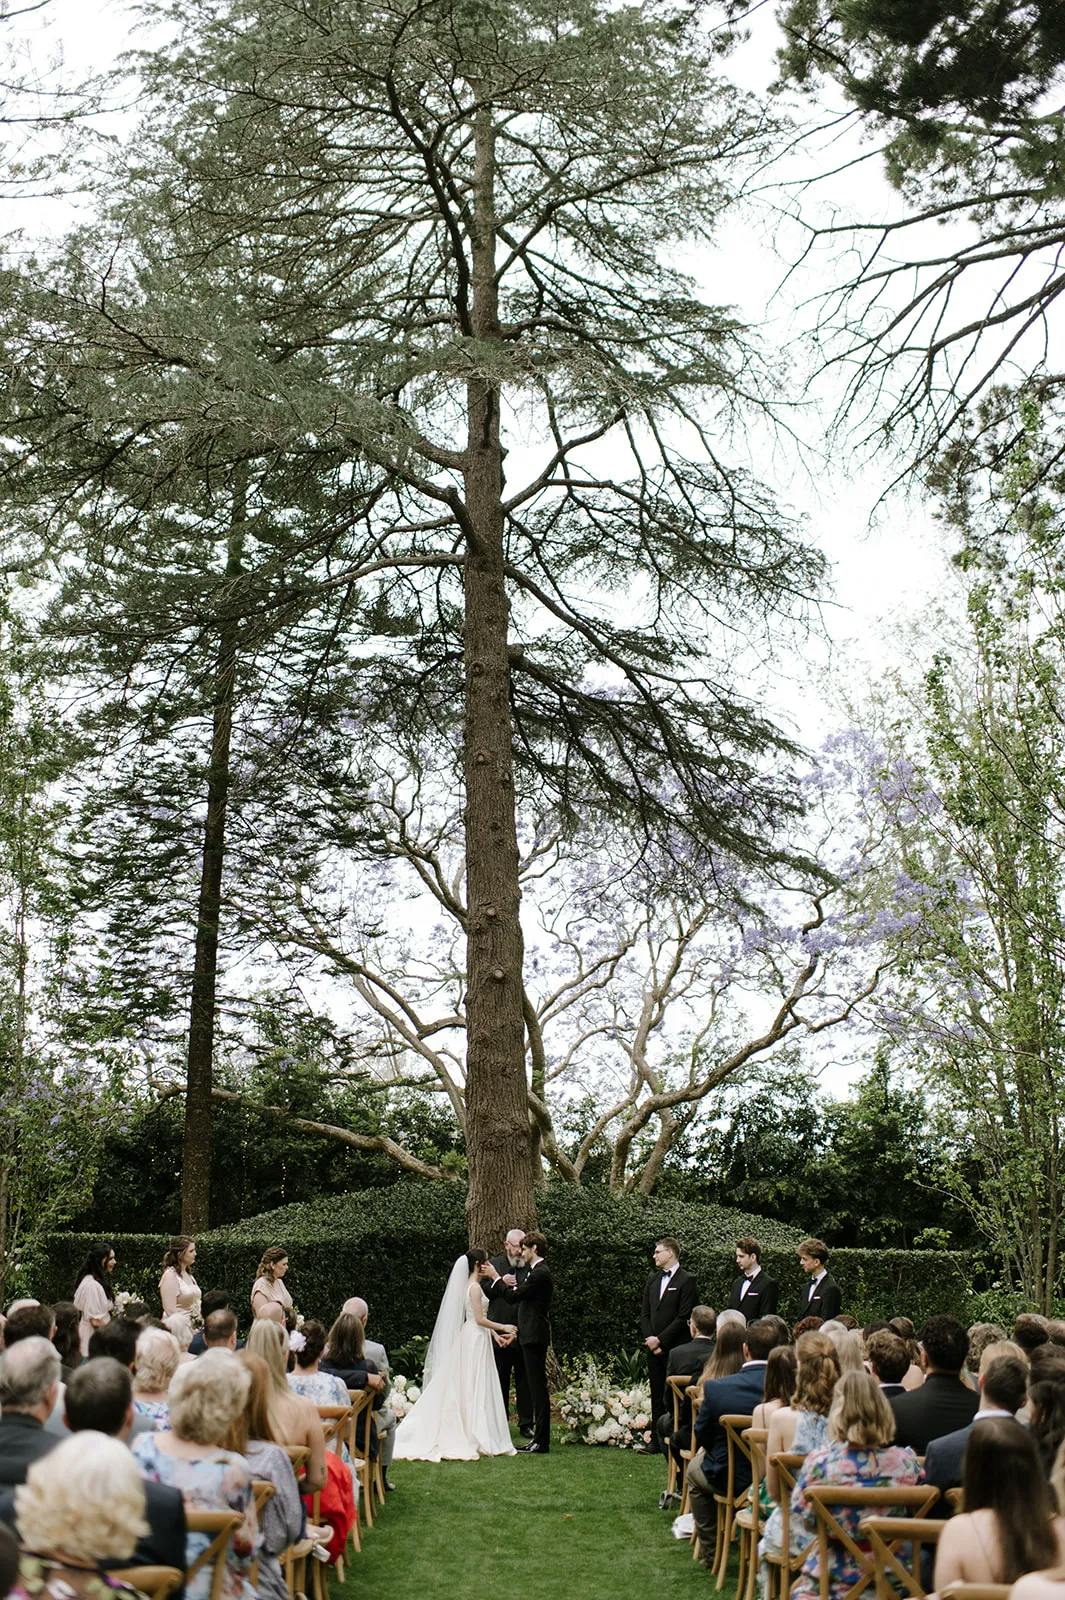 A couple stands before a large tree, exchanging vows in an outdoor wedding ceremony. Guests are seated on wooden chairs arranged in rows on either side of a grassy aisle, witnessing the moment. Bridesmaids and groomsmen stand by their sides. Trees and greenery surround the scene.